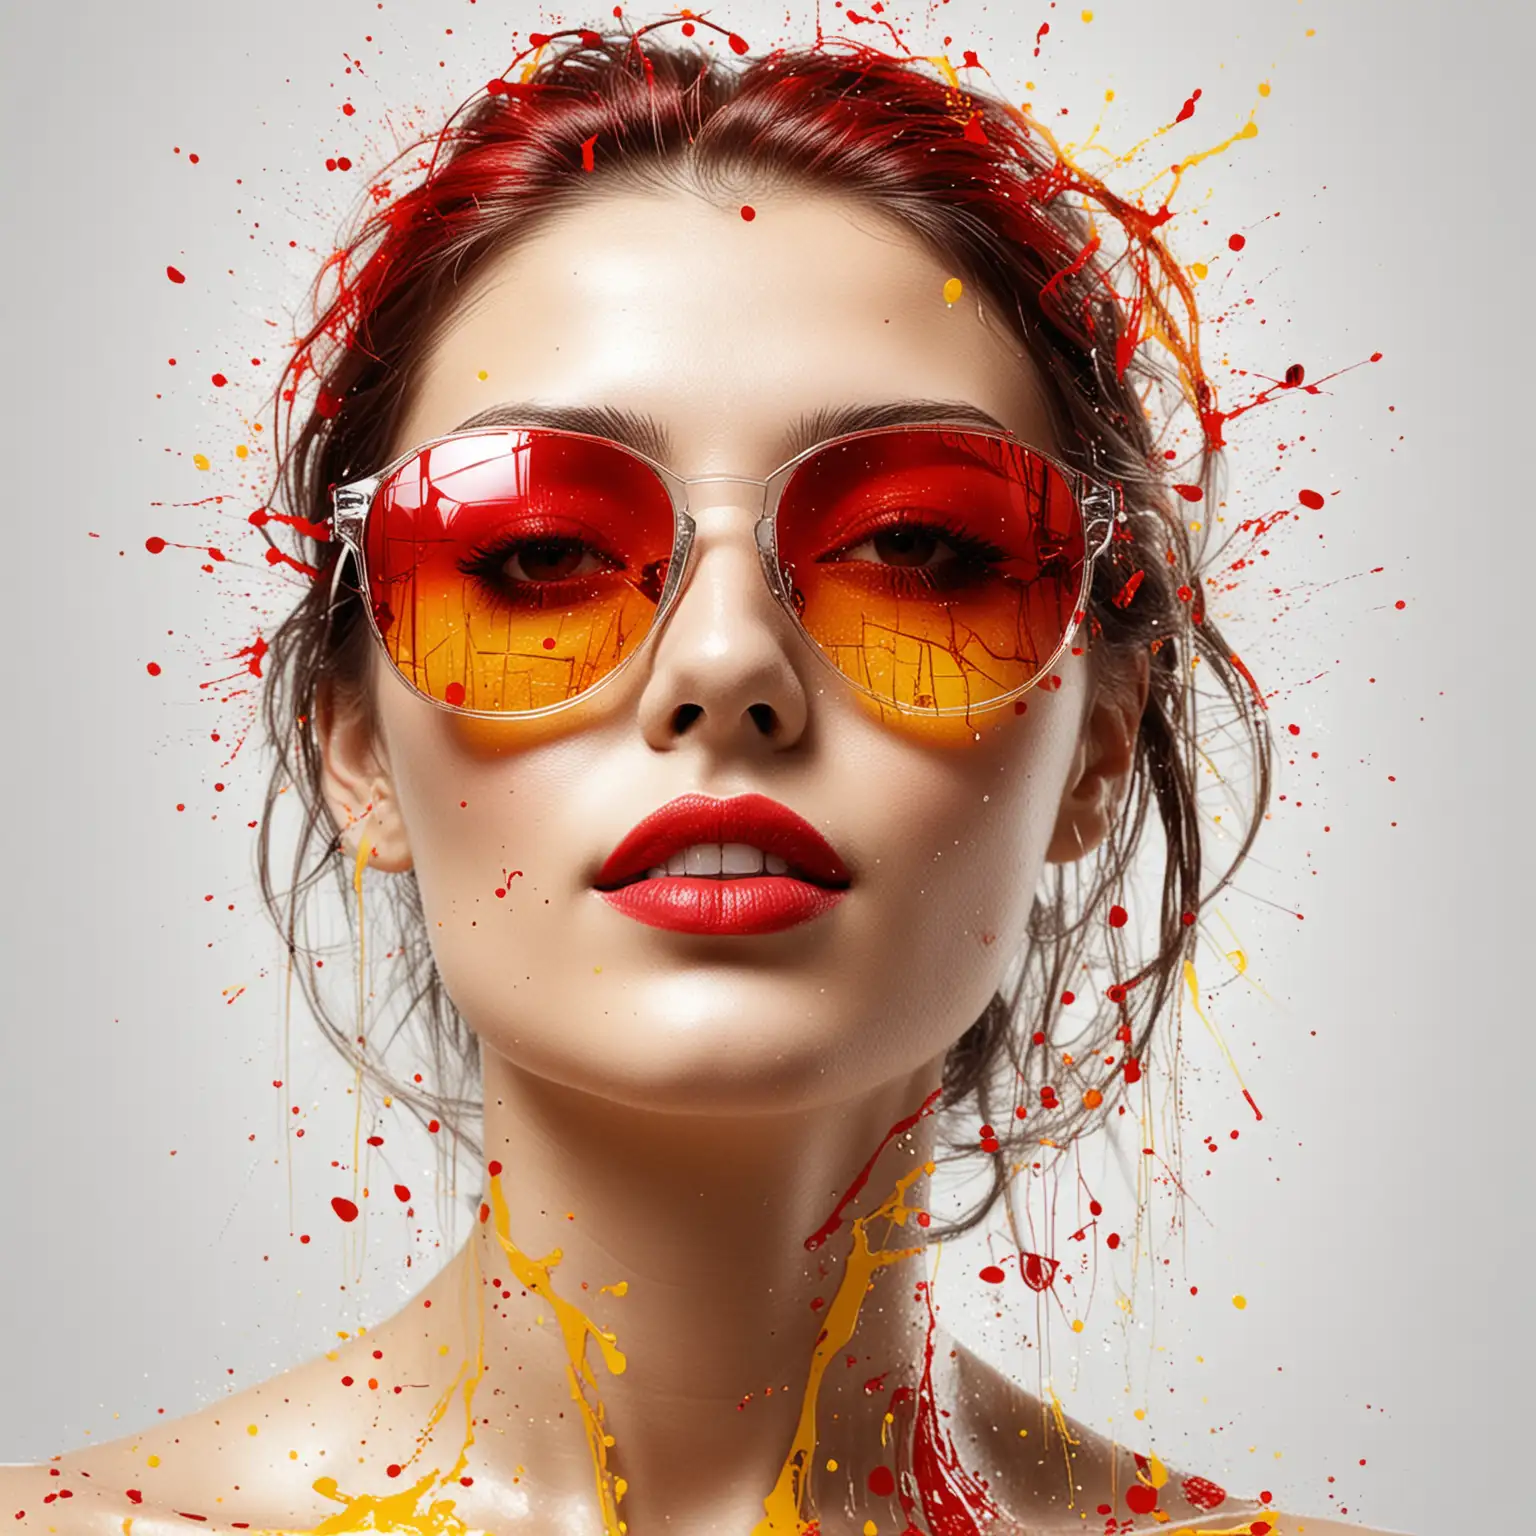 generate realistic profesional design featuring a image of a beautifull woman wearing sungalsses splitted in glass pieces . add red and yellow ink splash and lines over the design . use white  blank background